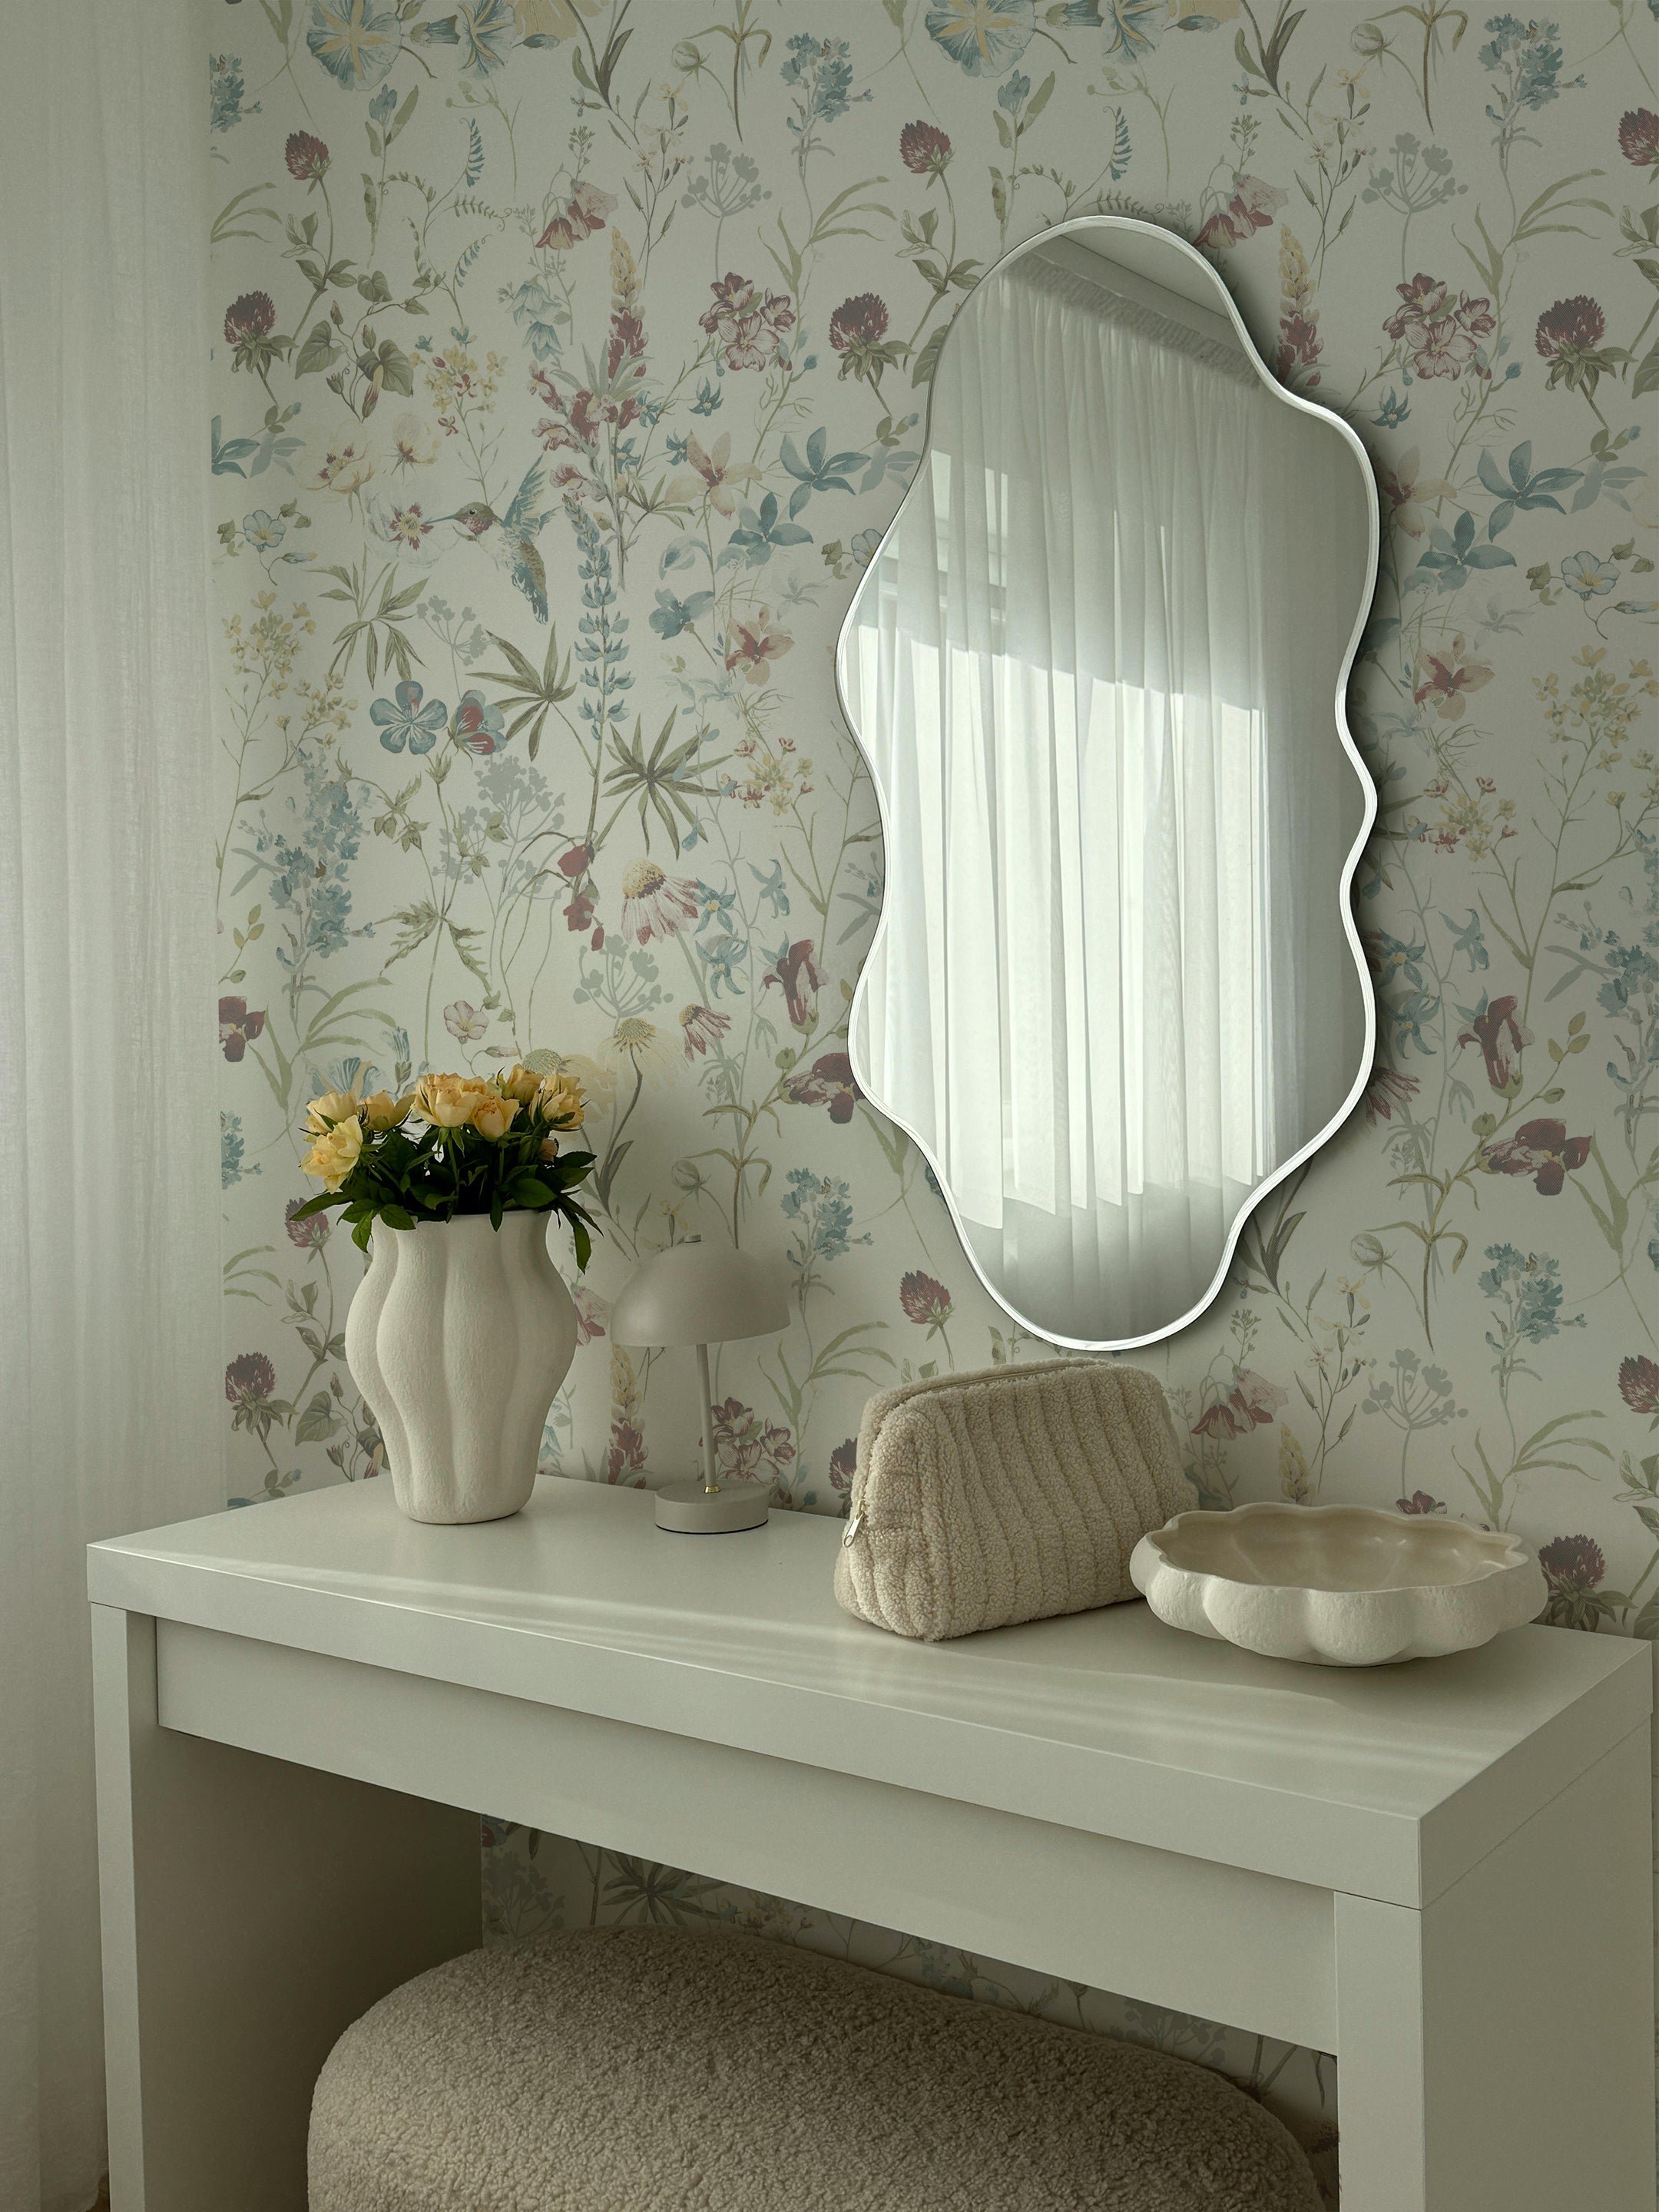 A stylish dressing area adorned with the Soft Feathered Blooms Wallpaper, featuring gentle floral prints and fluttering birds. The soft colors and natural elements provide a tranquil backdrop, complemented by a contemporary mirror and minimalist decor.